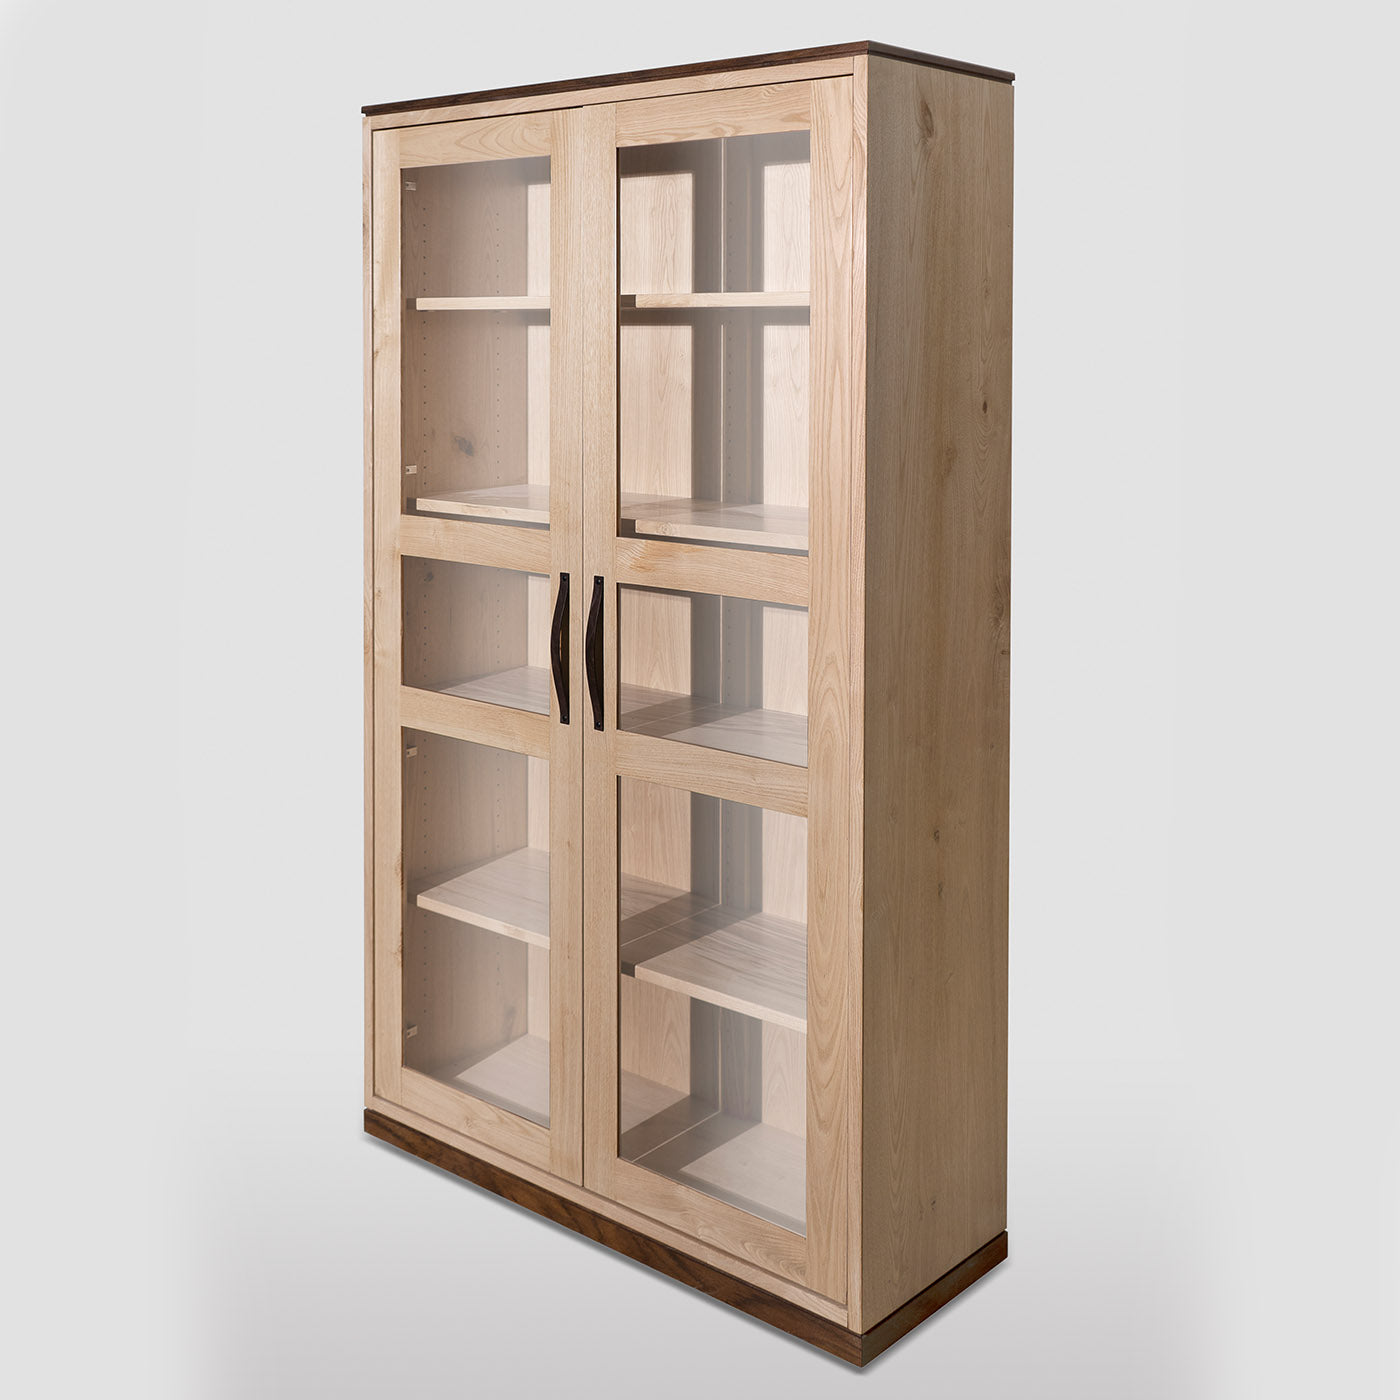 Siv Two-Door Bookcase by Erika Gambella - Alternative view 5